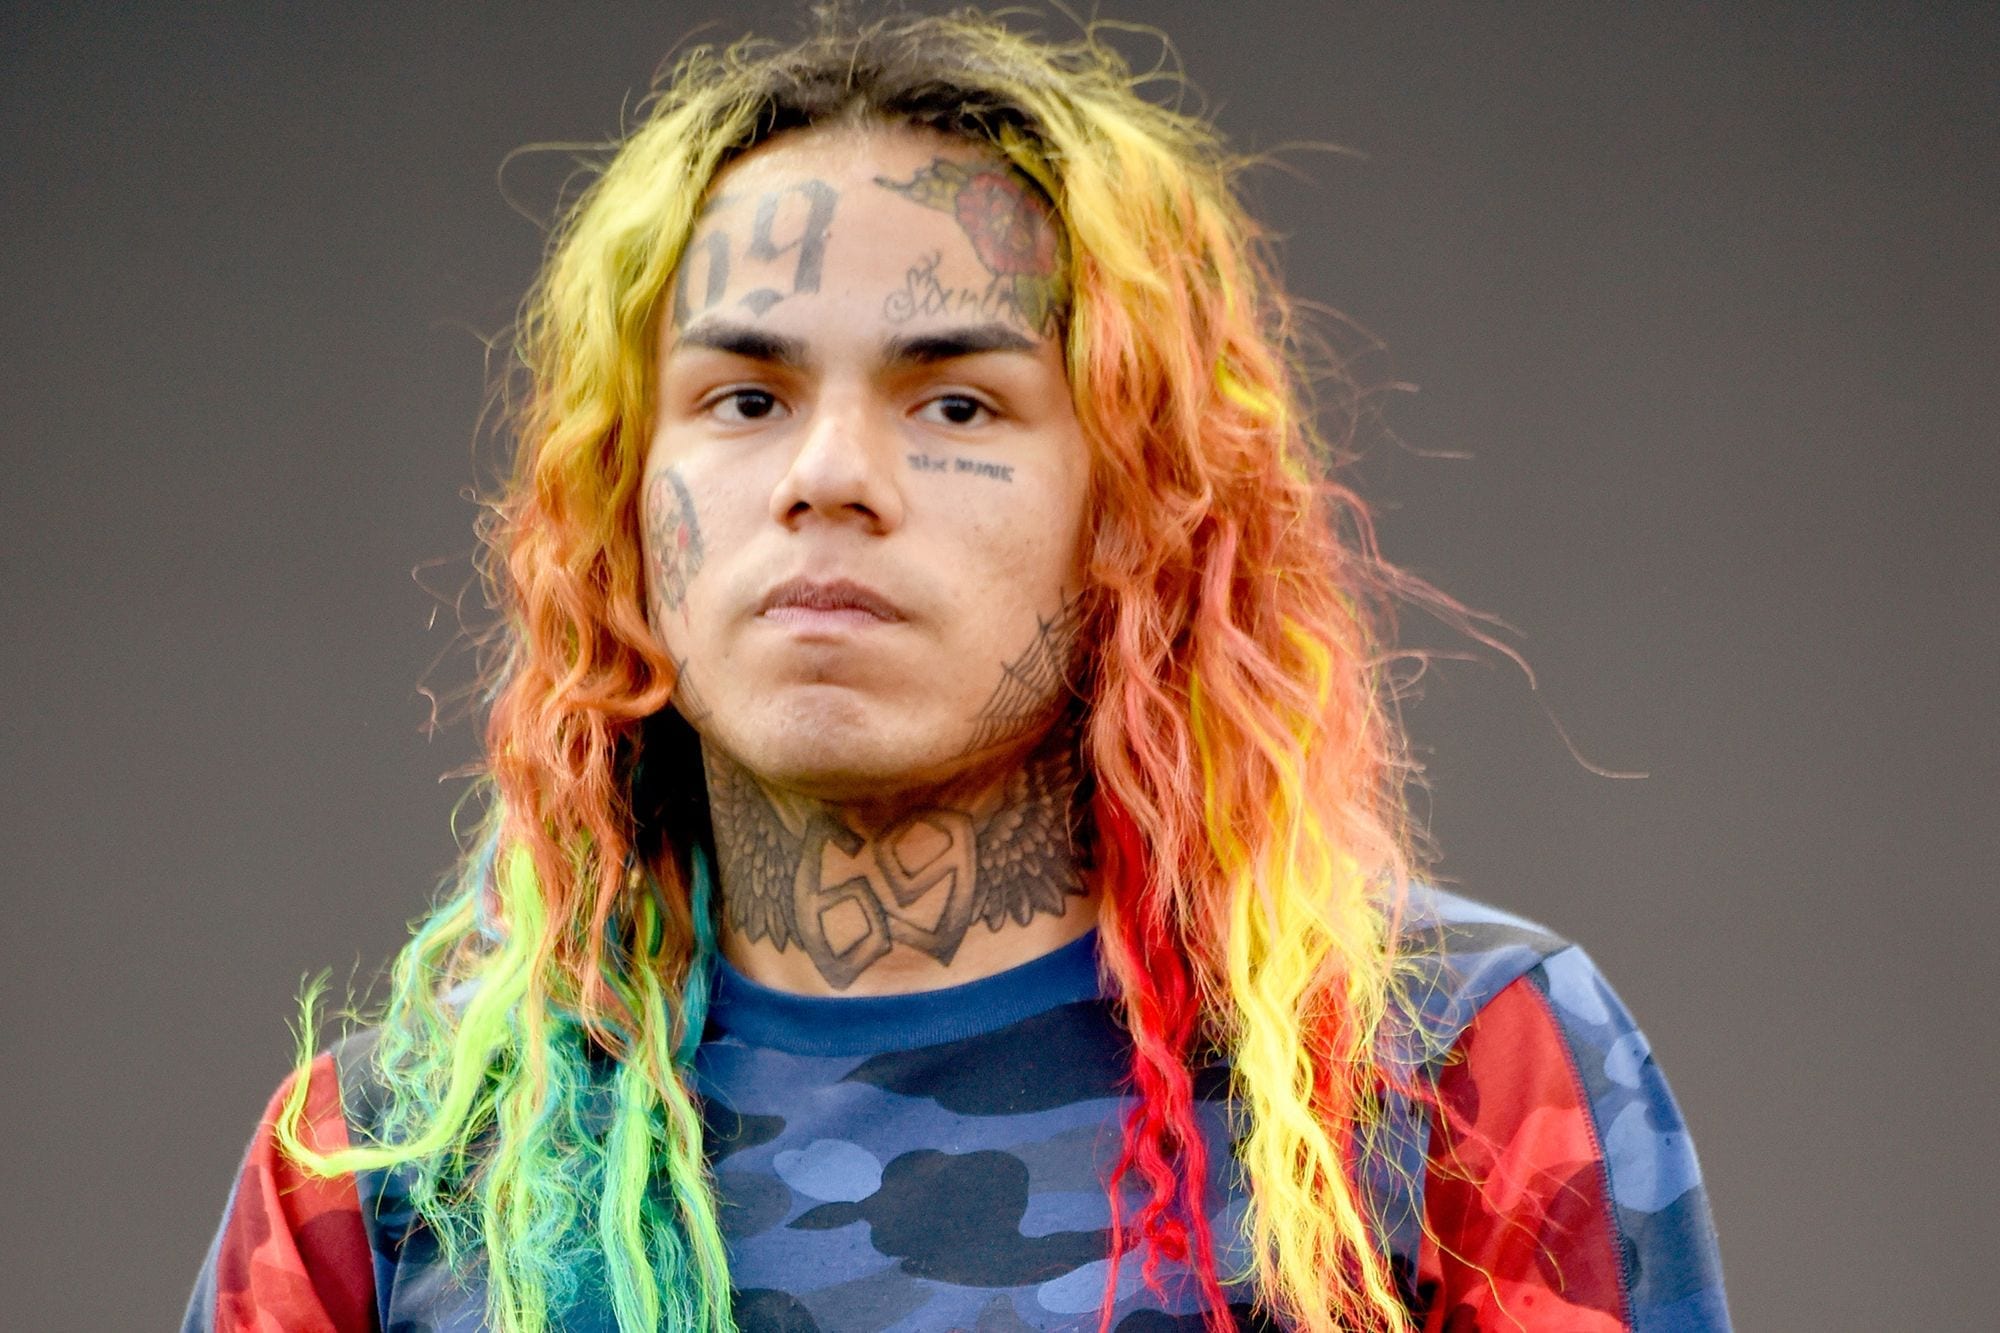 Production Duo Suing Tekashi 6ix9ine for Ripping Them Off